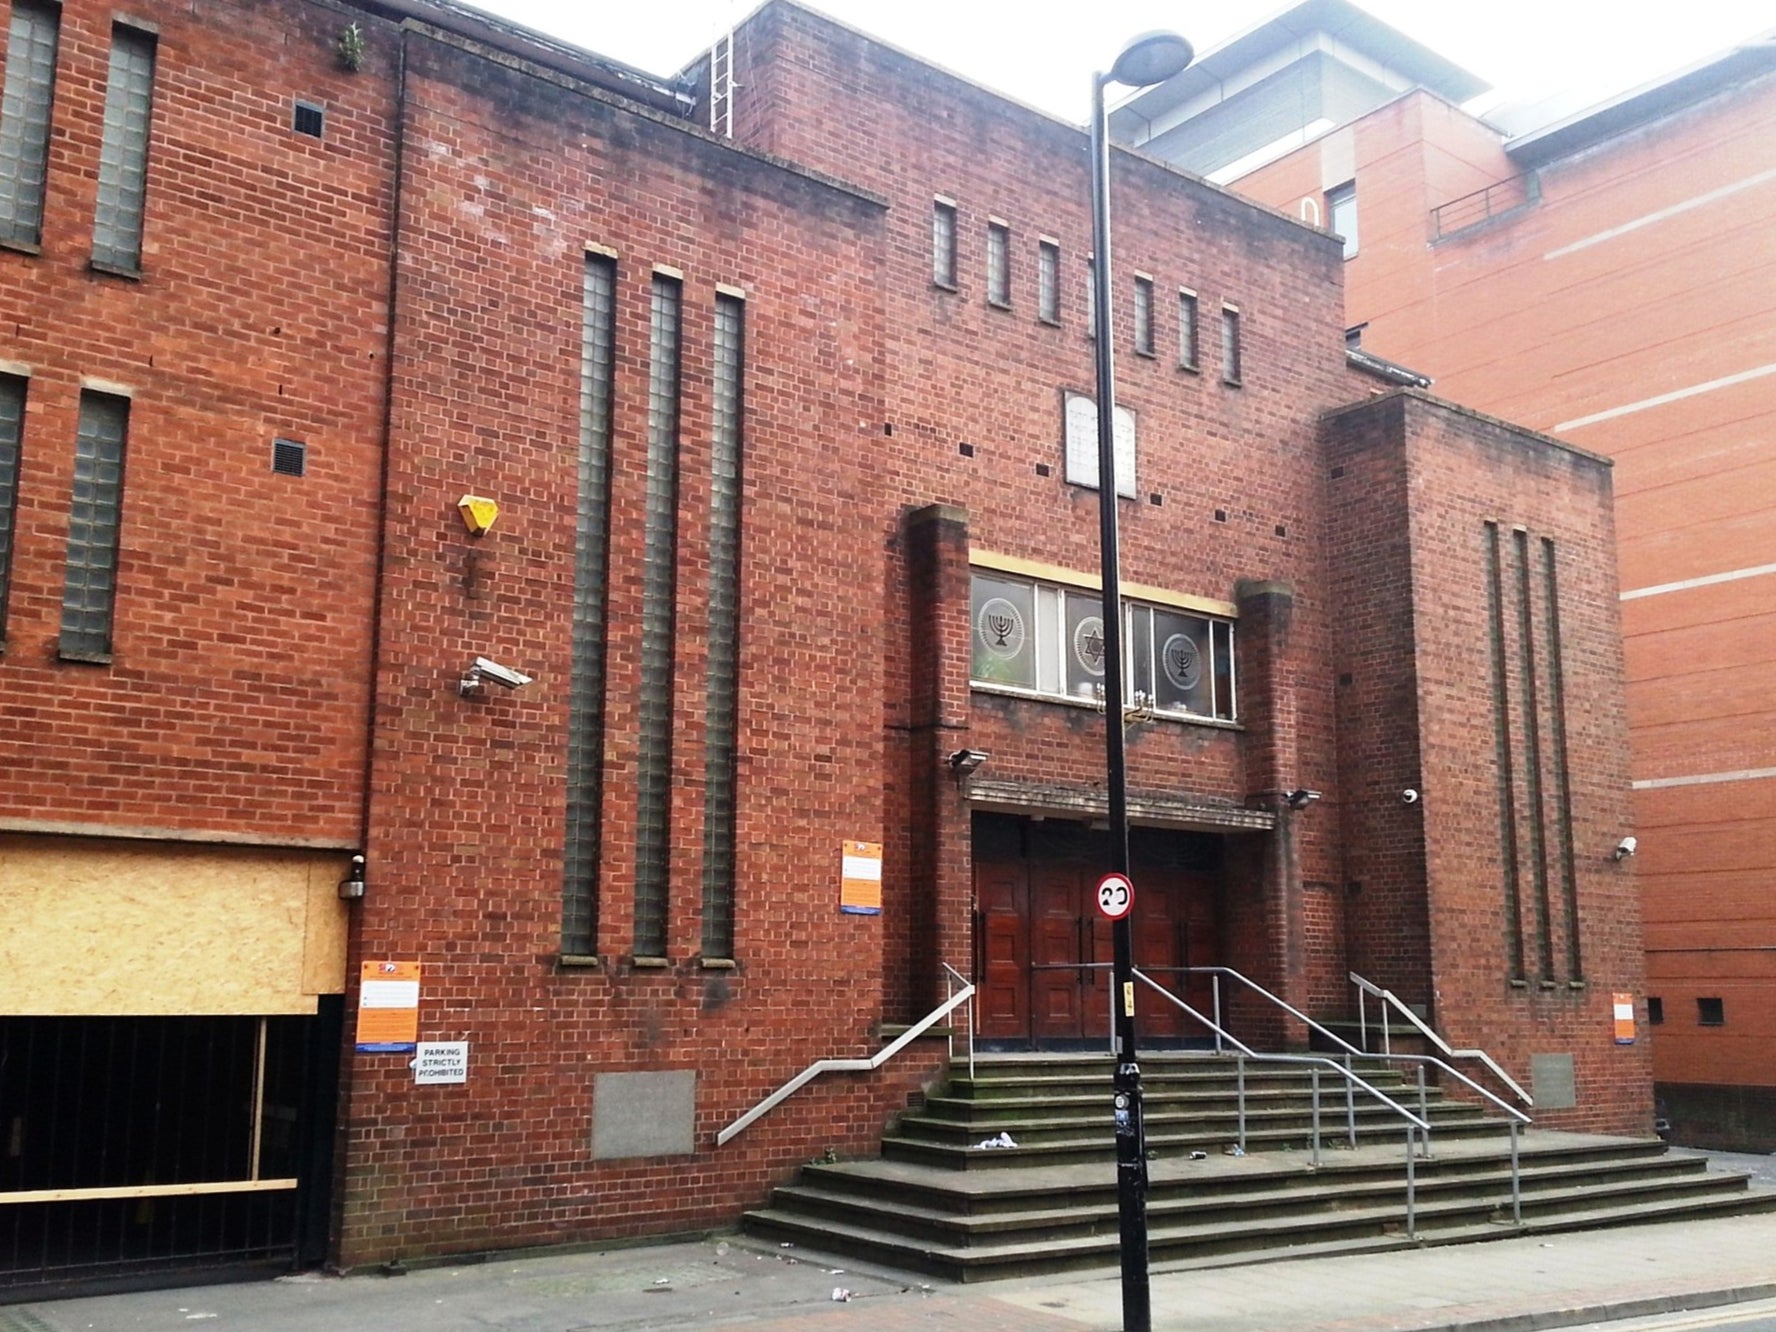 Manchester Reform Synagogue recently featured in the BBC’s ‘Ridley Road' series